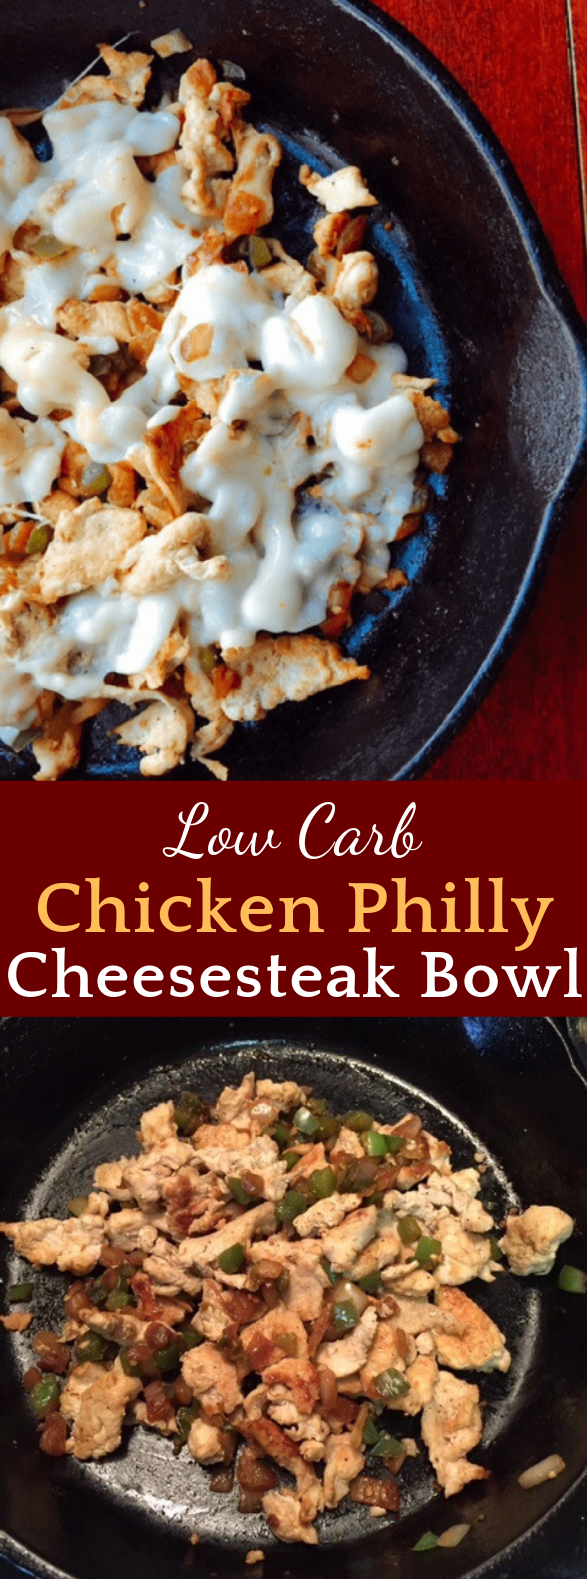 Low Carb Chicken Philly Cheesesteak Bowl #LowCarb #Chicken